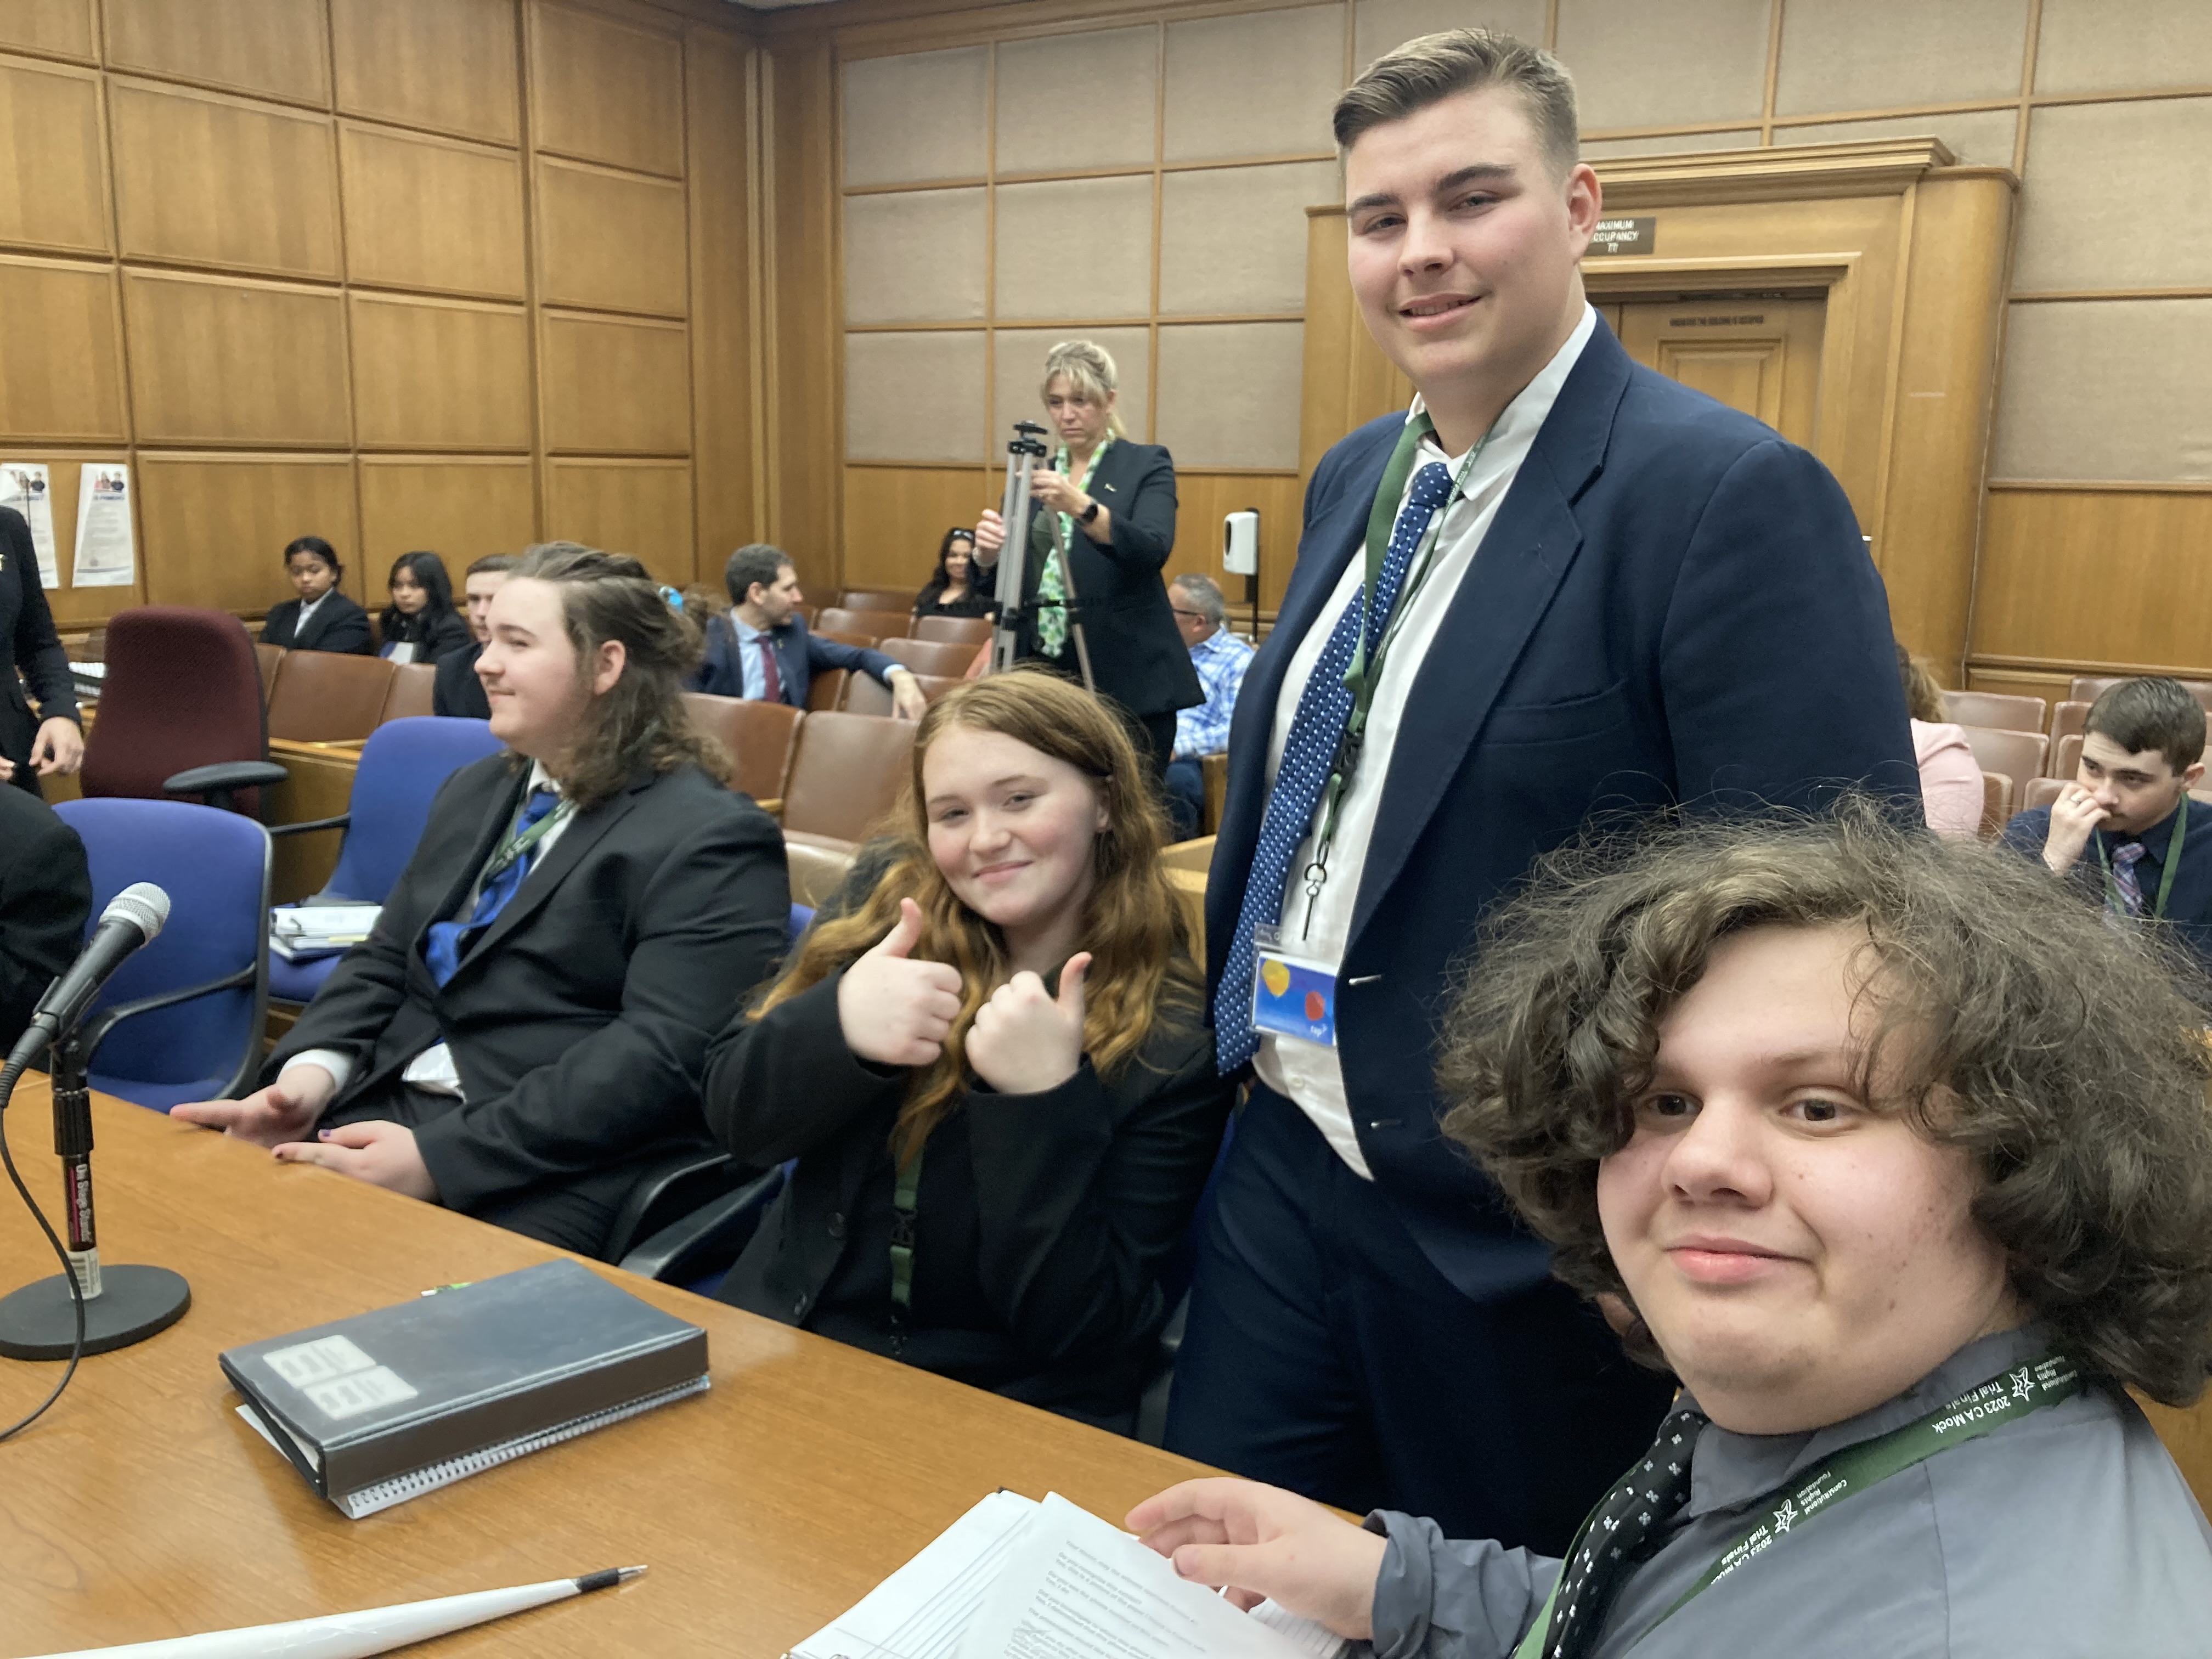 Mock trial students sitting at table smiling for picture